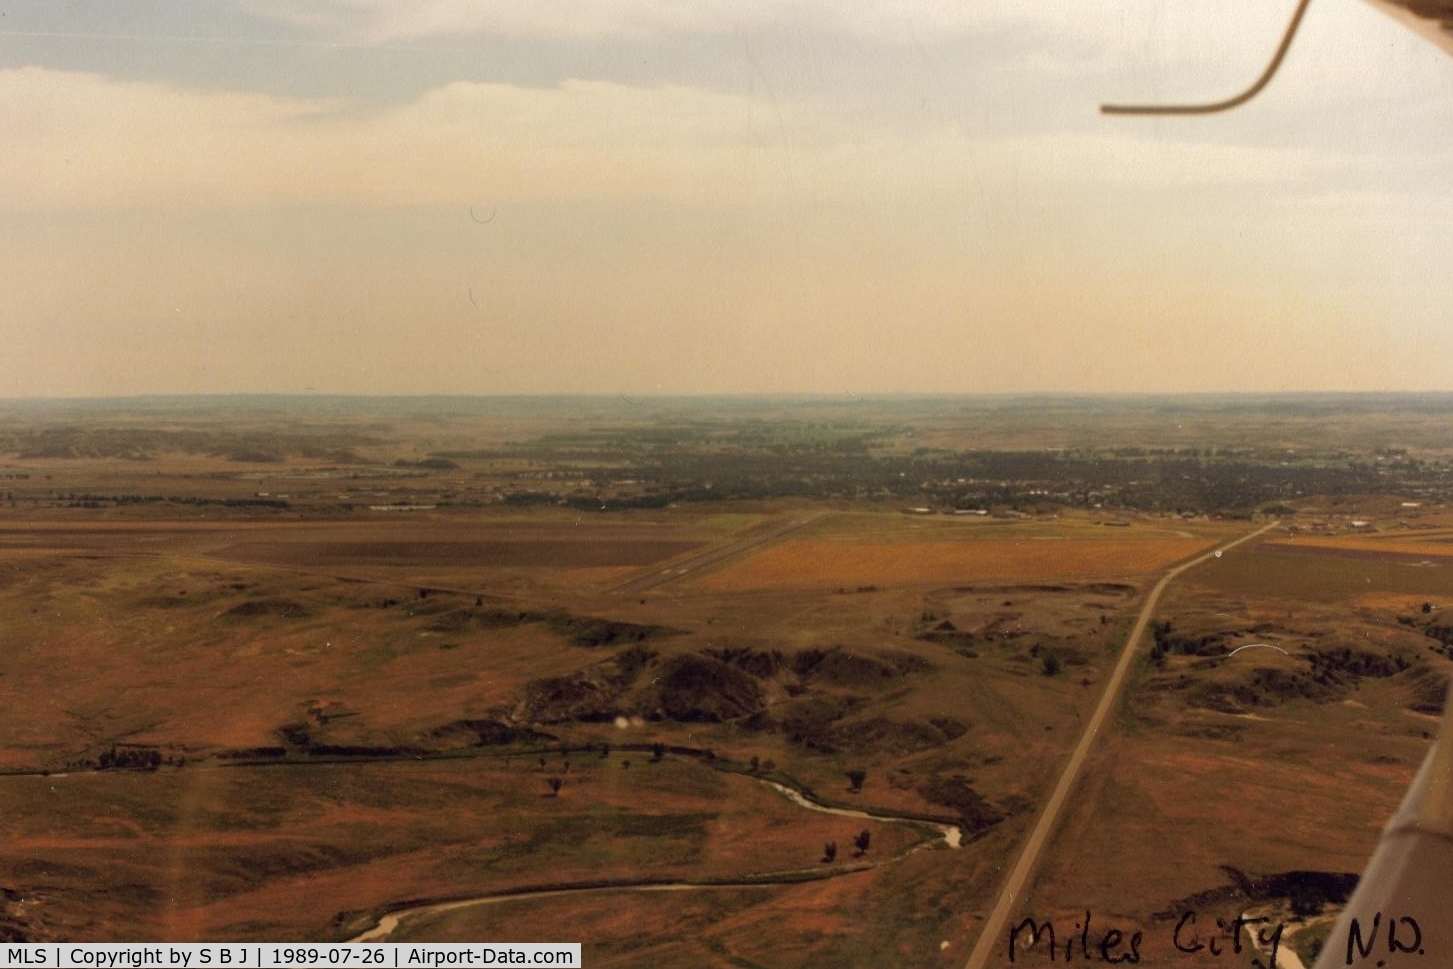 Frank Wiley Field Airport (MLS) - Air view of Miles City,Mt. airport.